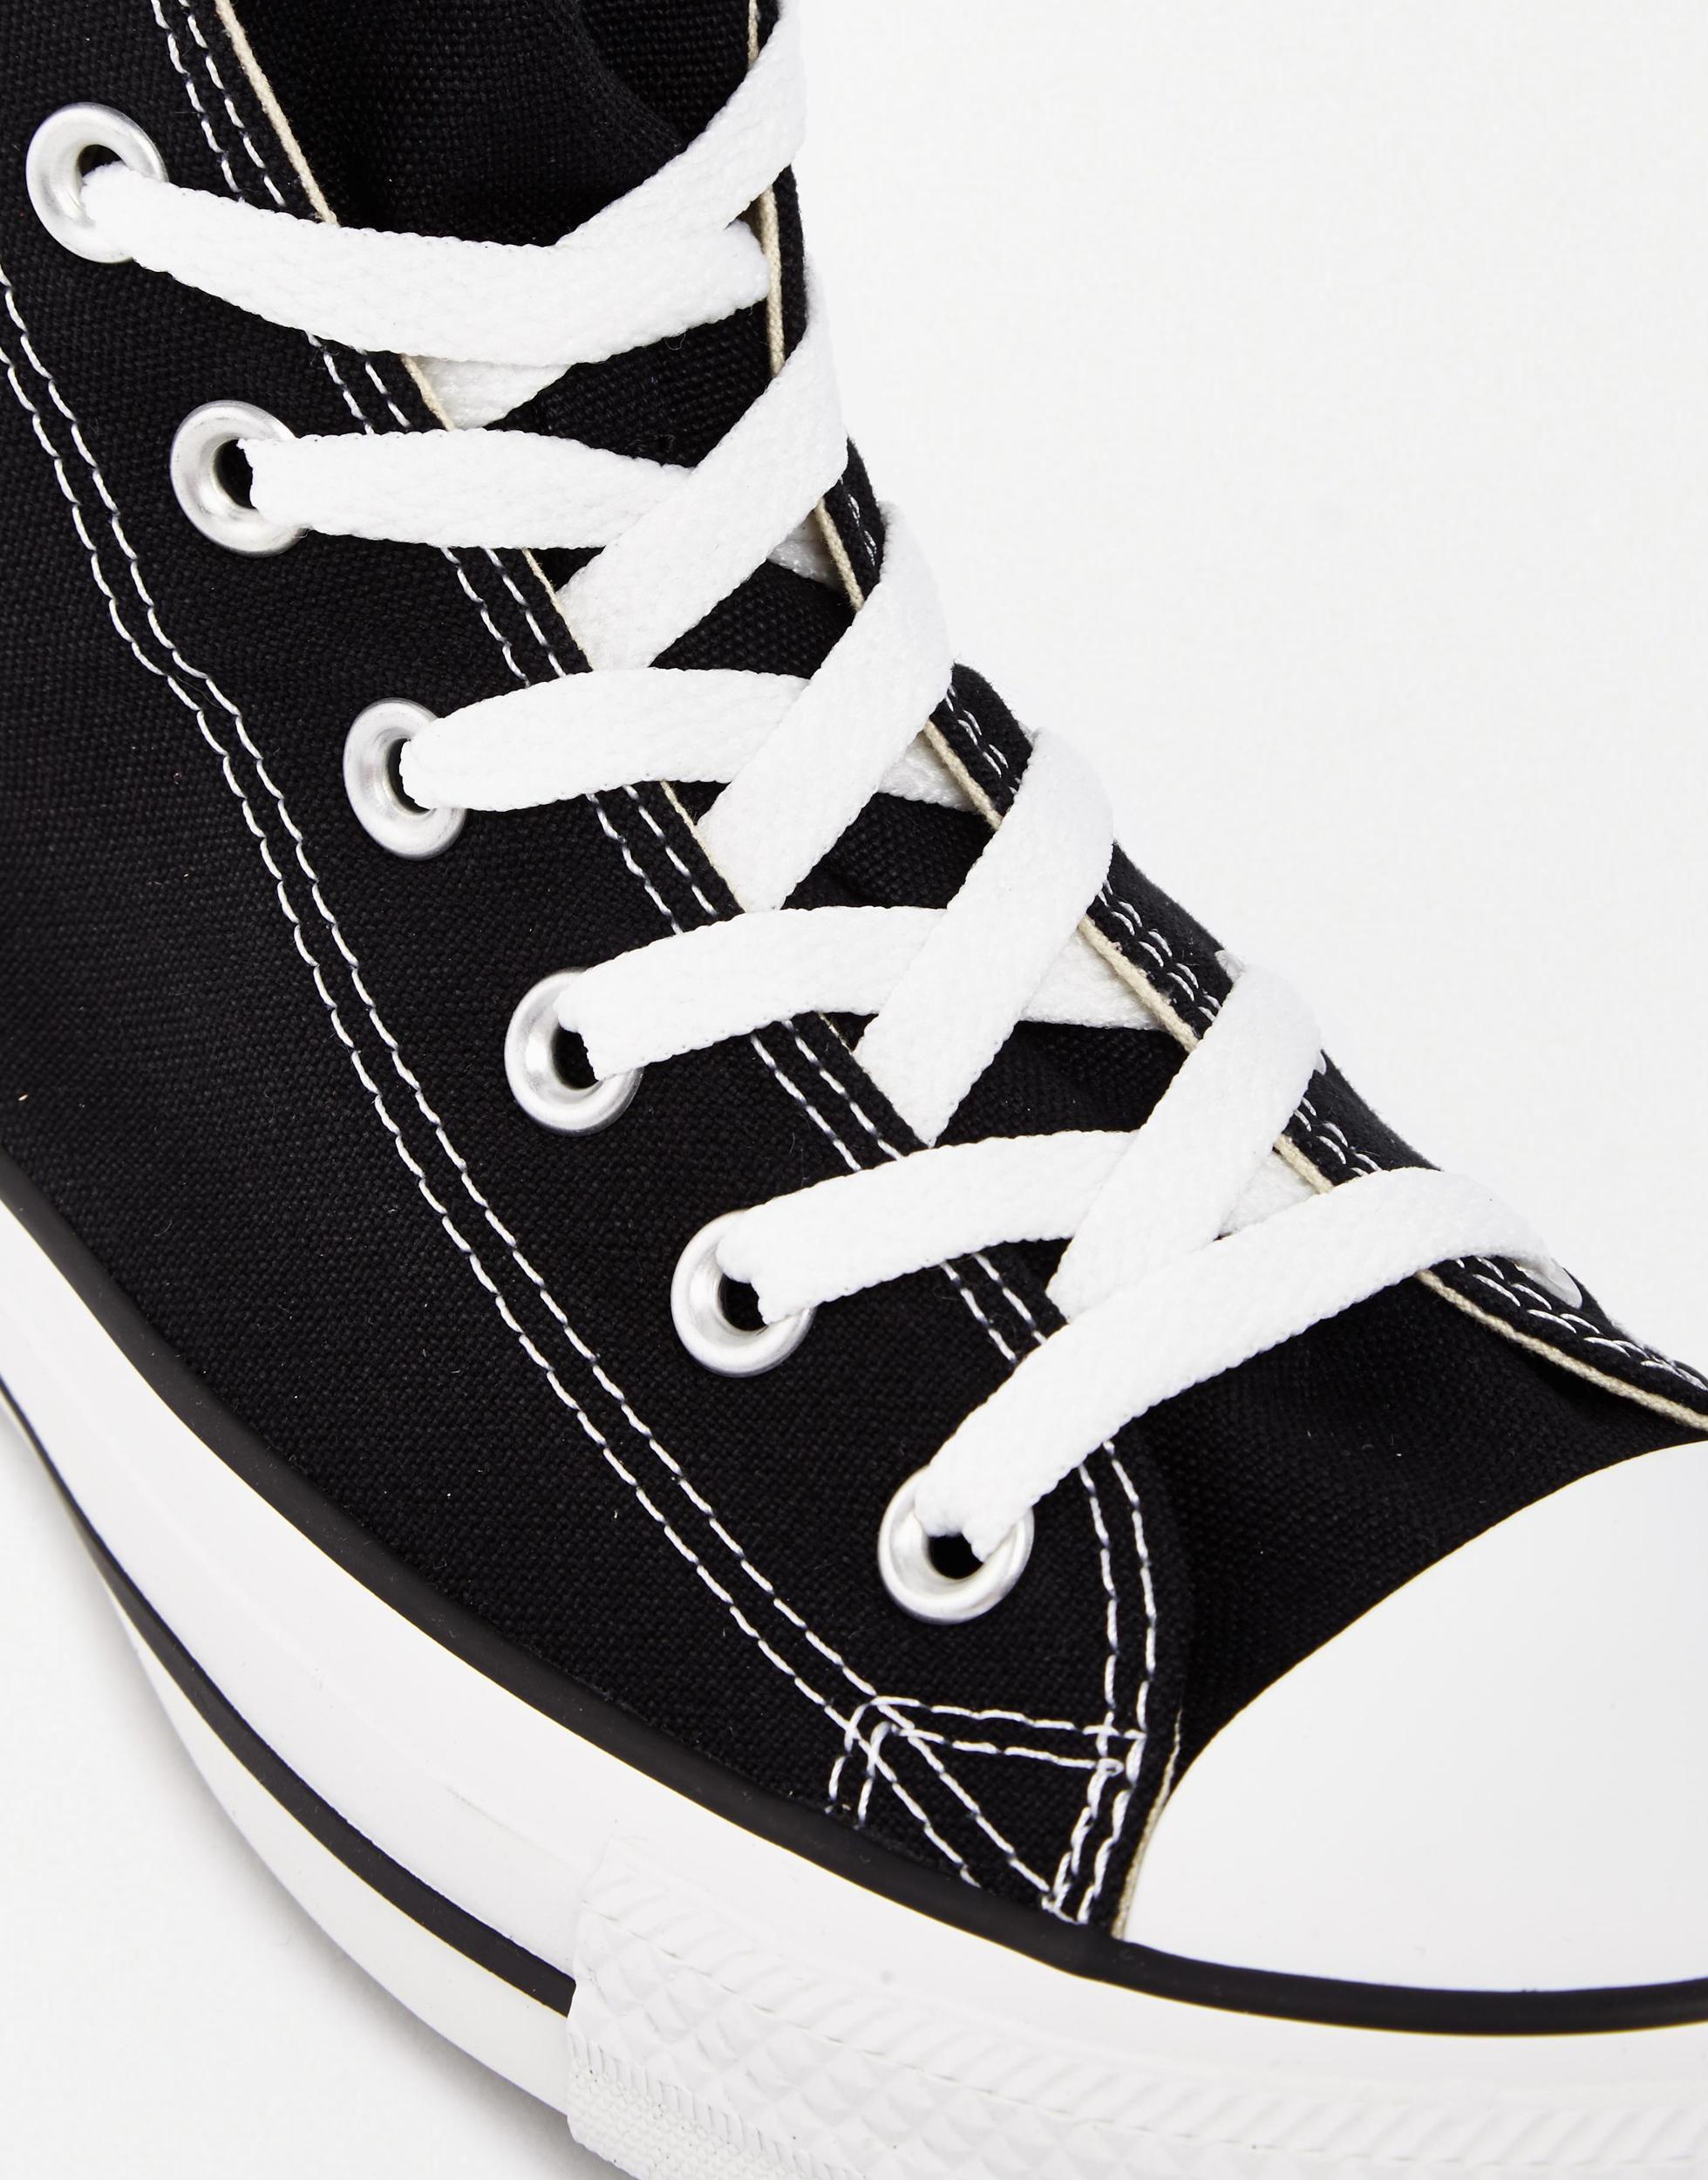 Converse All Star High Top Black Trainers - Save 26% - Lyst